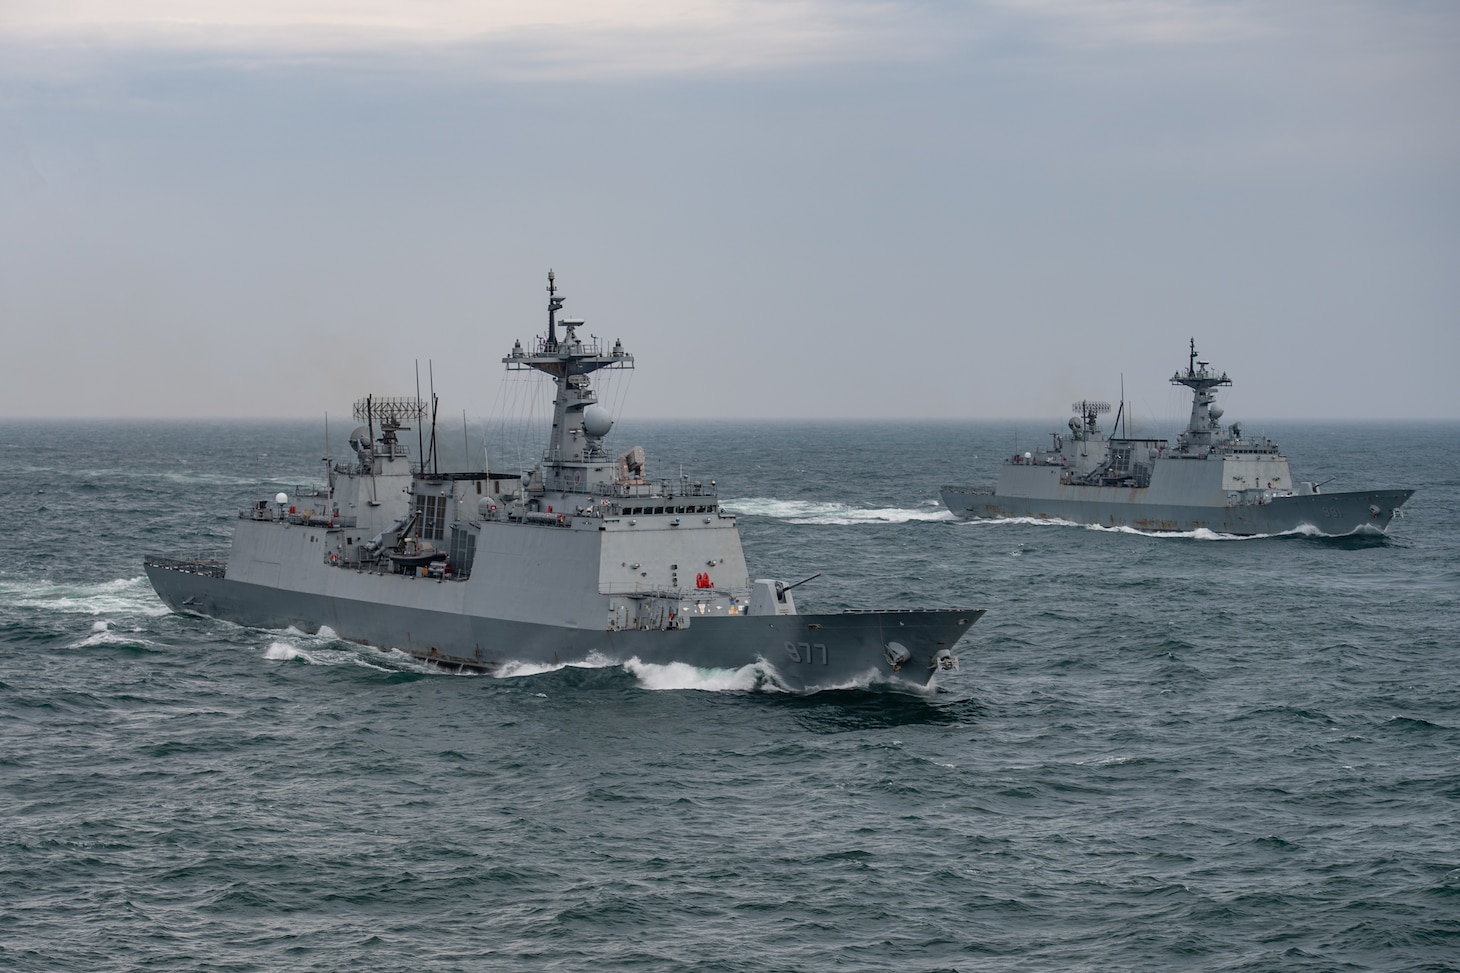 230404-N-DU622-1596 EAST CHINA SEA (April 4, 2023) The Republic of Korea (ROK) Navy Chungmugong Yi Sun-Shin-class destroyers ROKS Dae Jo young (DDH 977) and ROKS Choi Young (DDH 981) steam in formation with the aircraft carrier USS Nimitz (CVN 68). The Nimitz Carrier Strike Group is conducting a trilateral maritime exercise with the ROK Navy and Japan Maritime Self-Defense Force in the U.S. 7th Fleet area of operations. 7th Fleet is the U.S. Navy's largest forward-deployed numbered fleet, and routinely interacts and operates with allies and partners in preserving a free and open Indo-Pacific region. (U.S. Navy photo by Mass Communication Specialist 2nd Class Justin McTaggart)